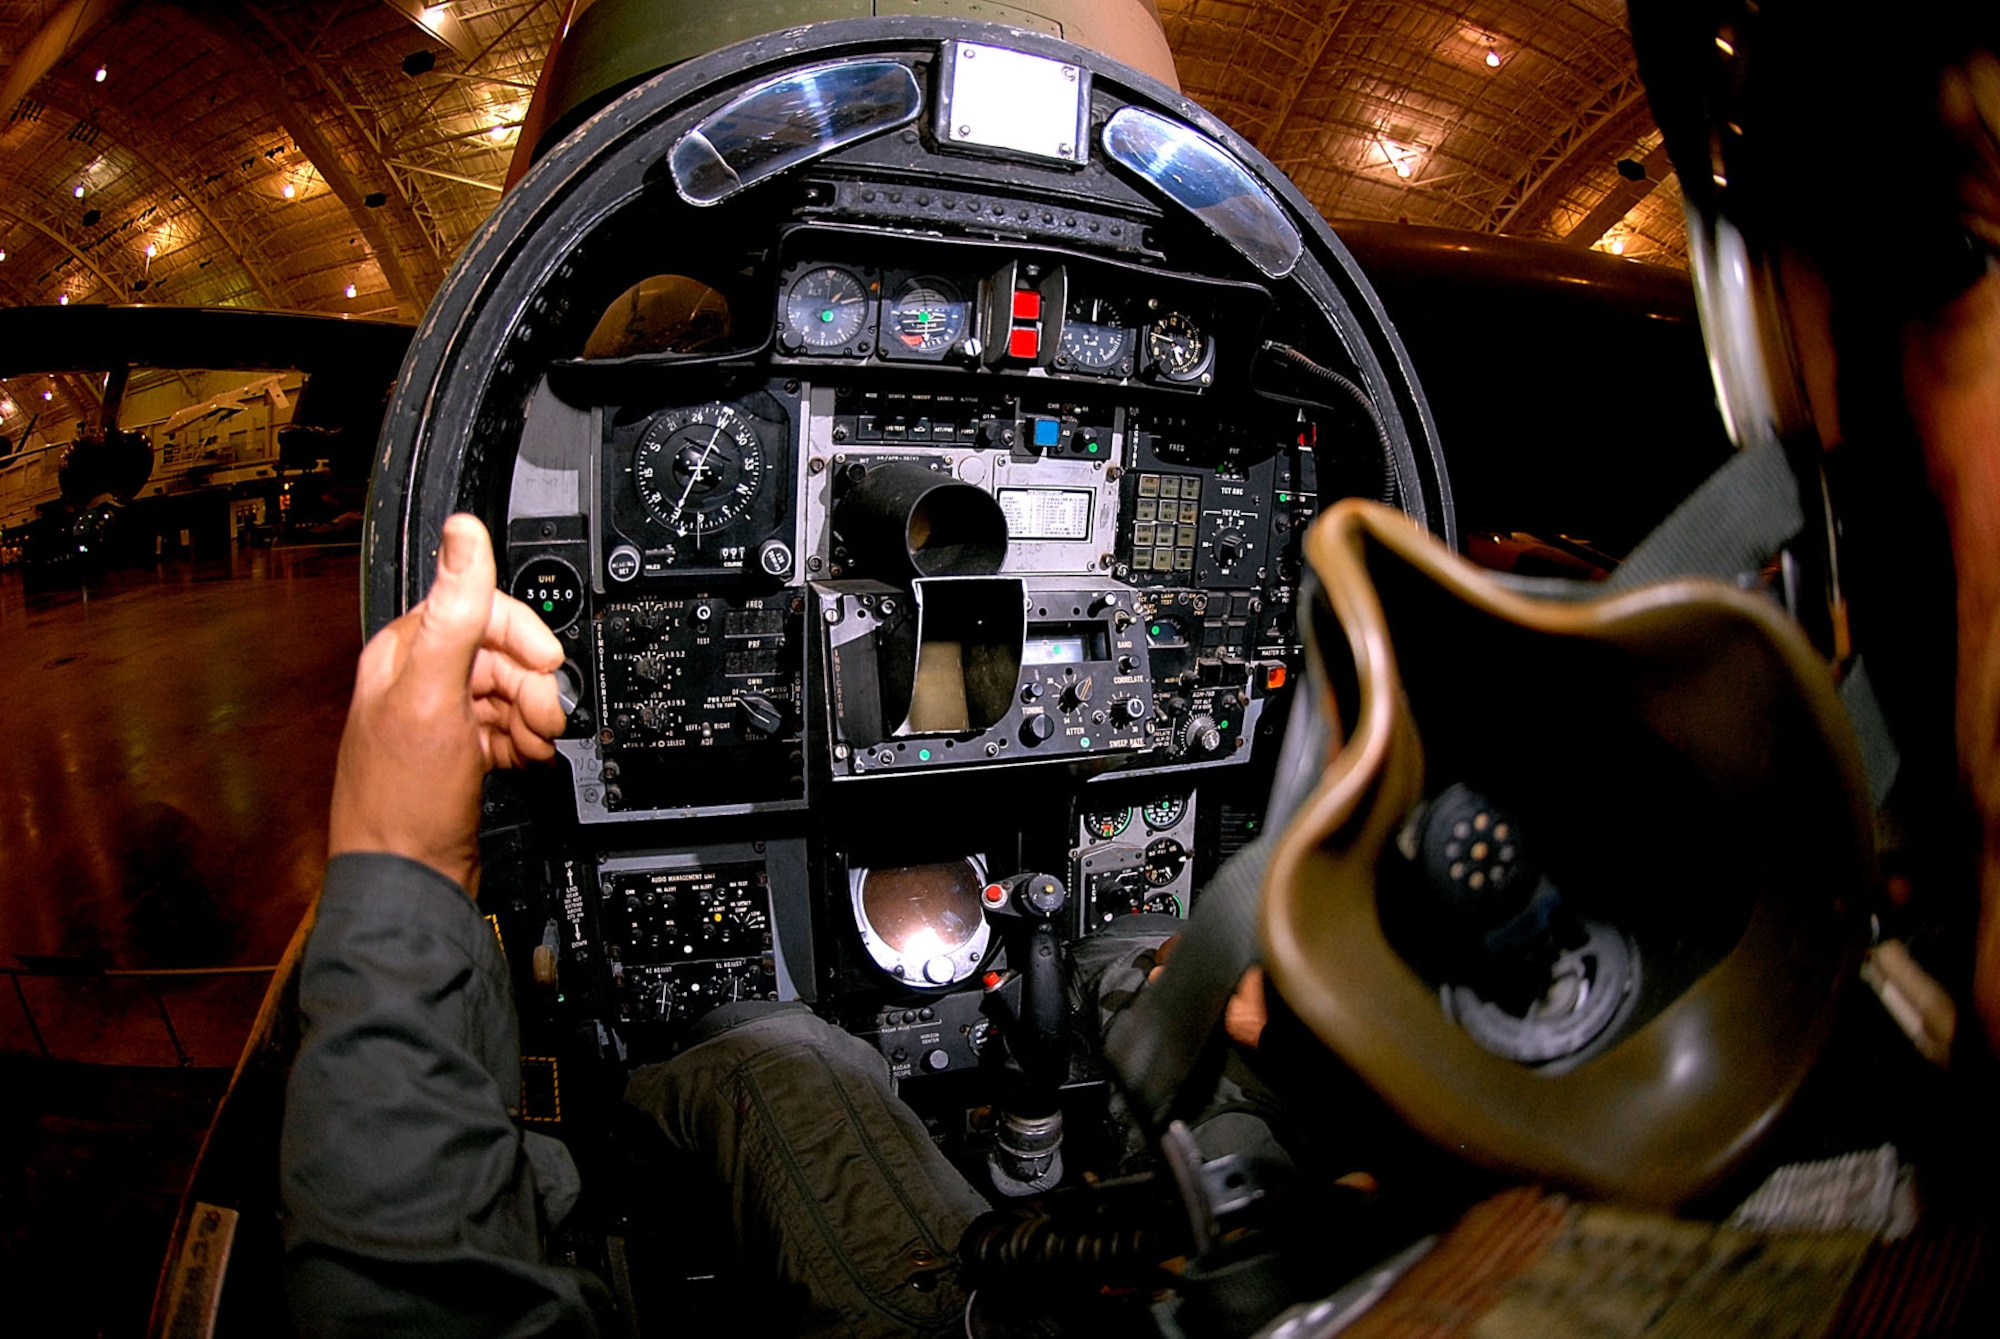 DAYTON, Ohio - Republic F-105G cockpit at the National Museum of the U.S. Air Force. (U.S. Air Force photo)